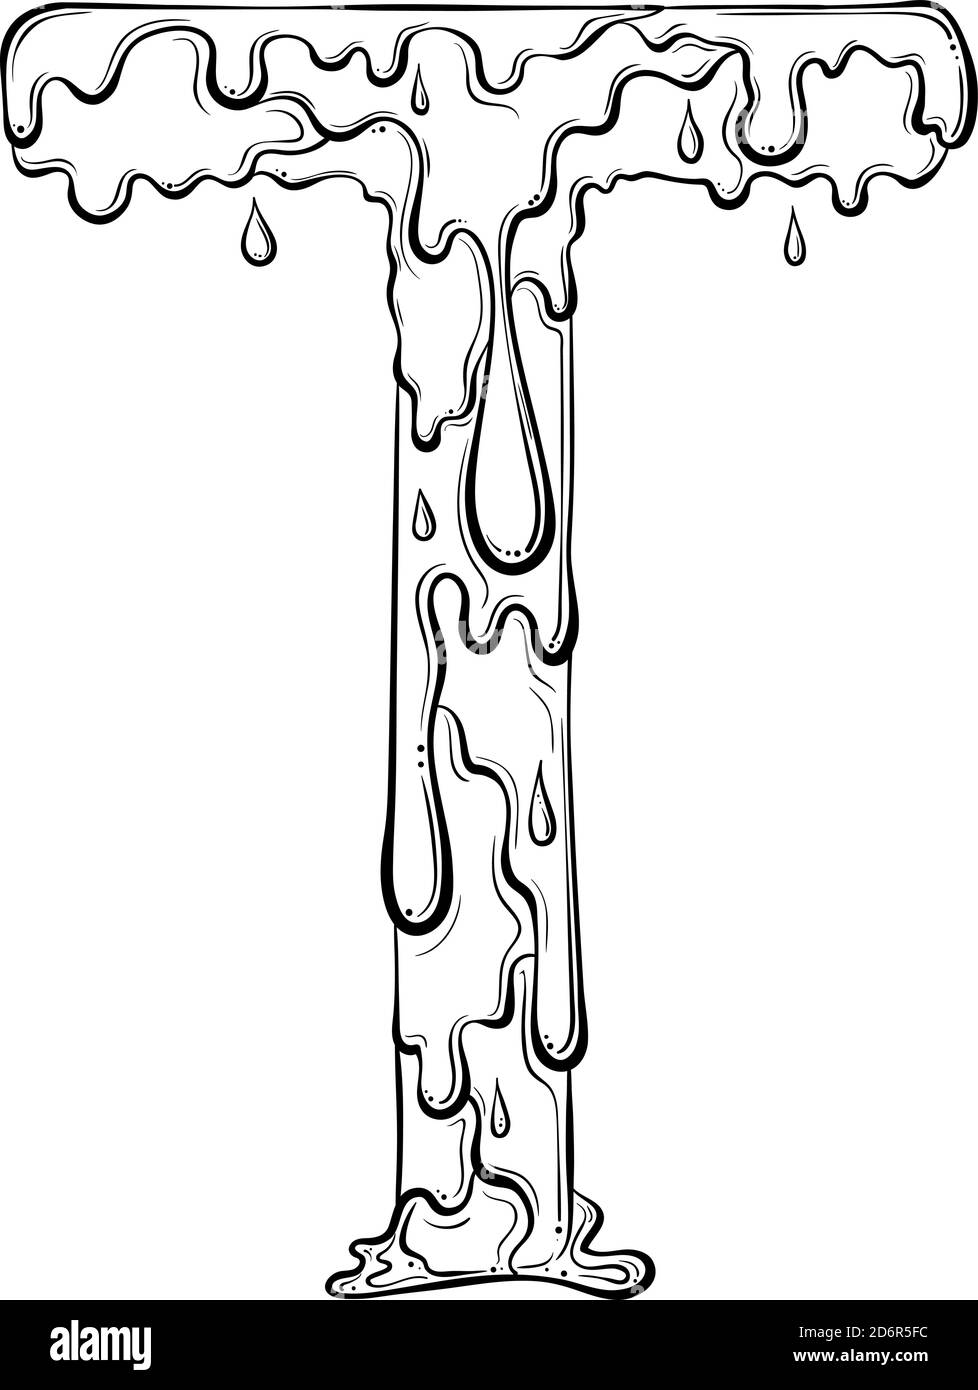 Letter T with flow drops and goo splash. Dripping liquid symbol. Vector trendy font made in hand drawn line art style isolated on white background. Slime logo or initial letter. Stock Vector